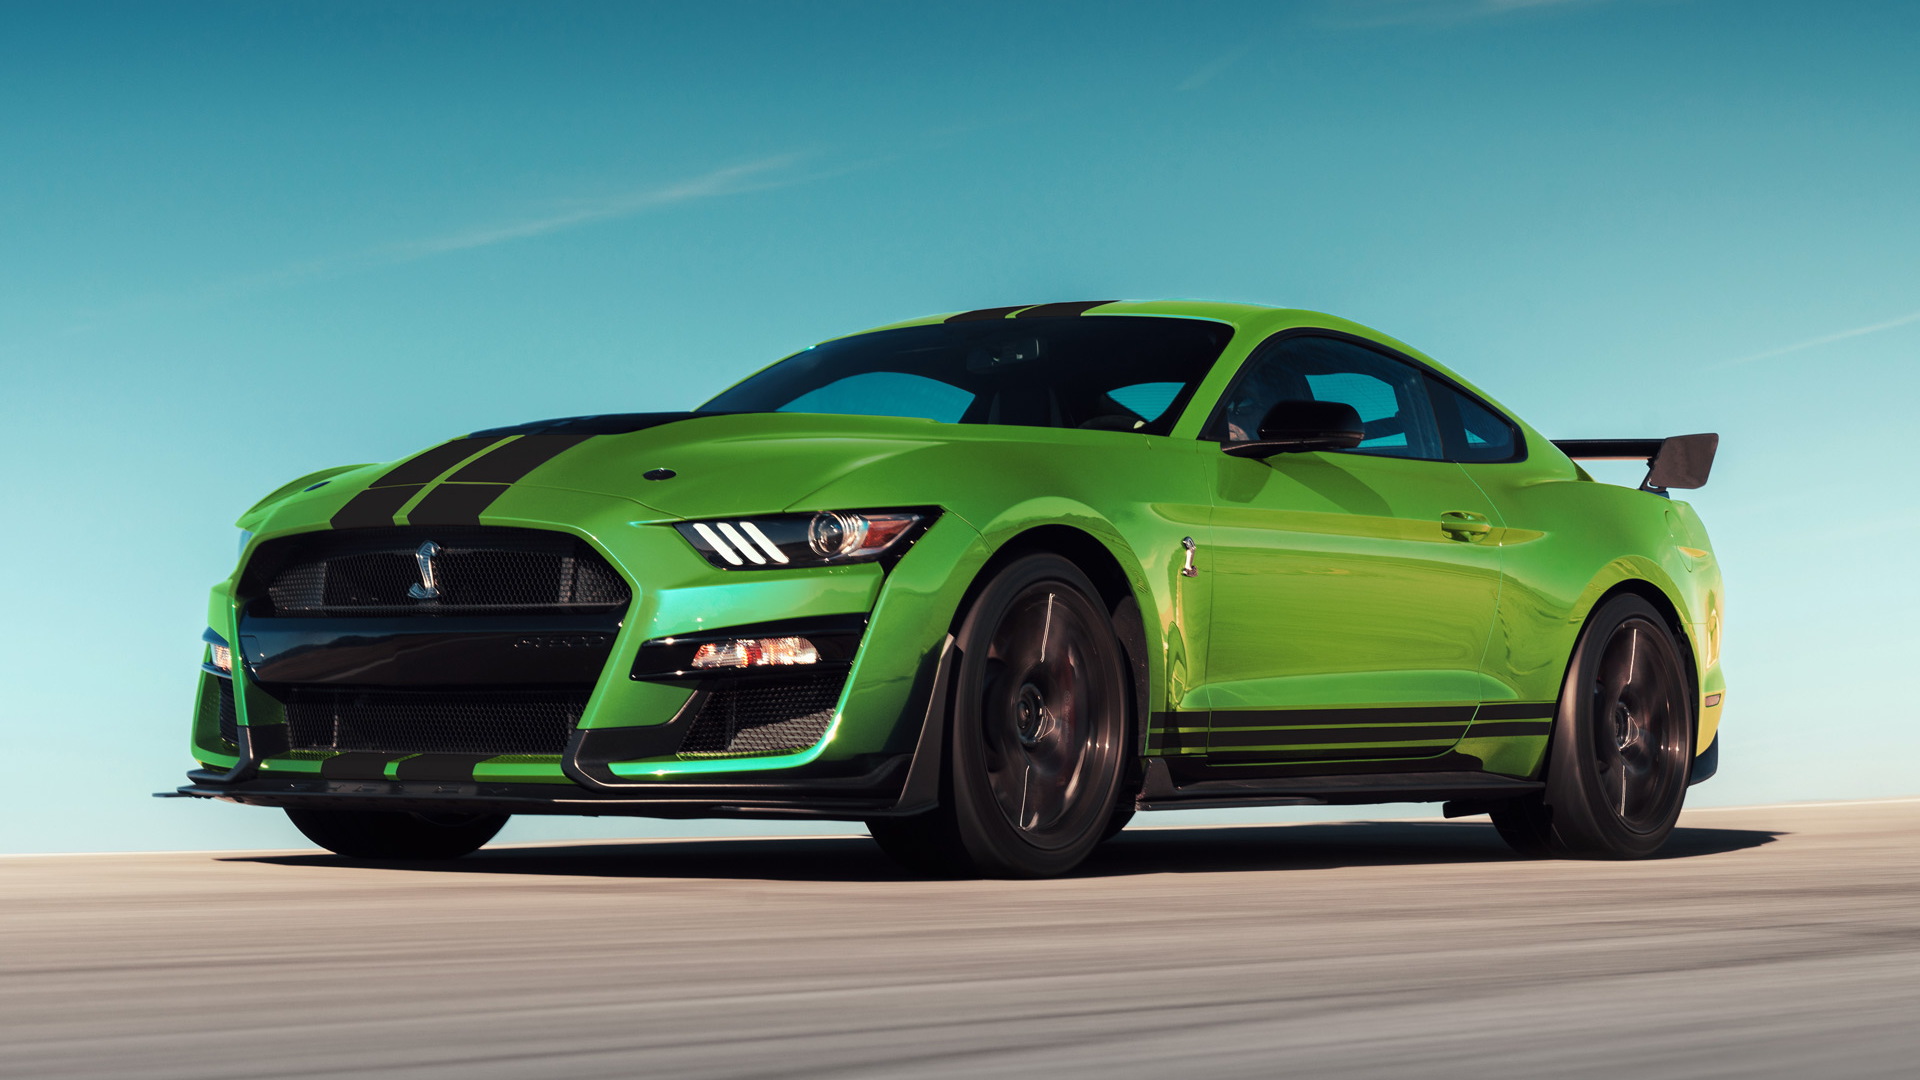 2020 Ford Mustang Shelby GT500 in Grabber Lime